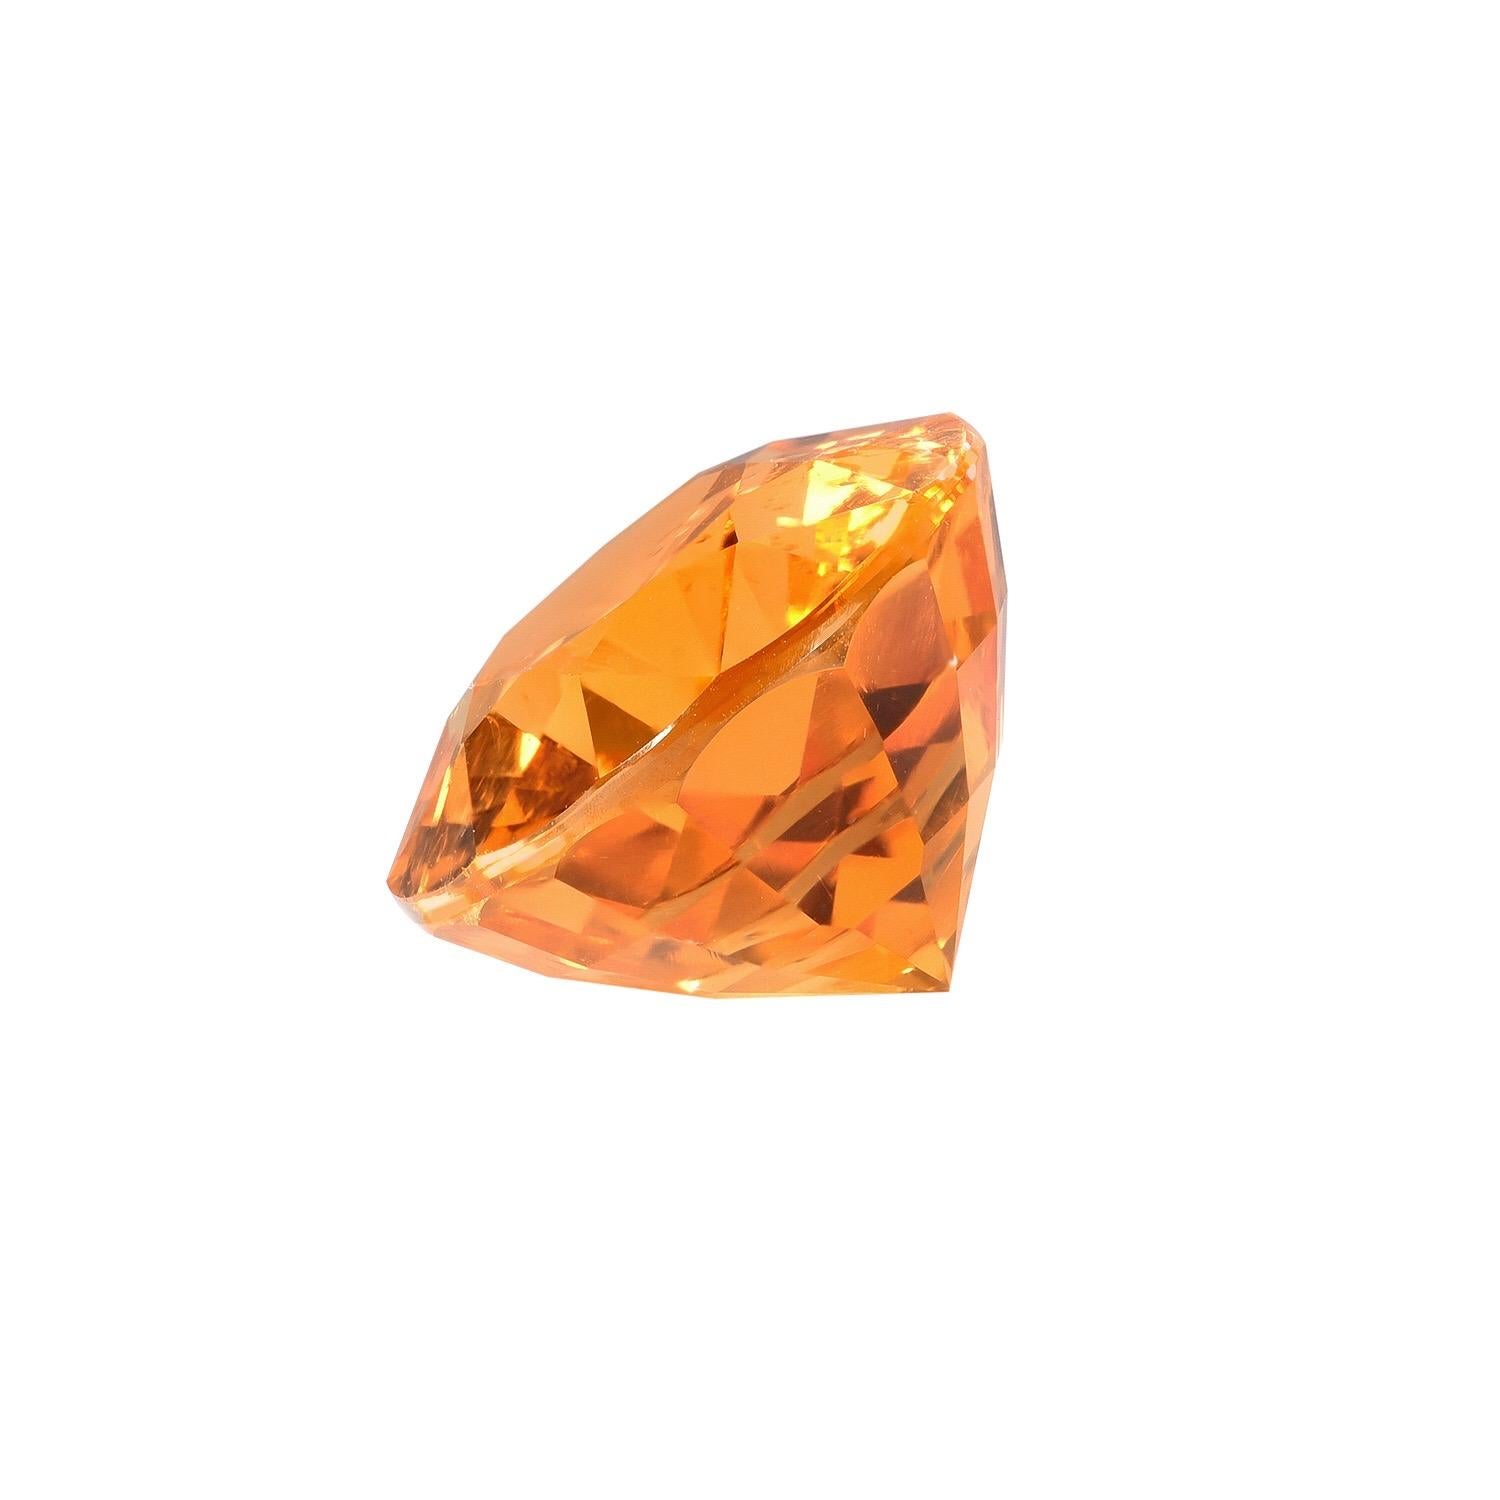 Supreme quality 7.53 carat oval Mandarin Garnet, offered loose, for the world's most discerning gem collectors. 
Returns are accepted and paid by us within 7 days of delivery.
We also offer ultra exclusive custom jewelry work upon request. Please